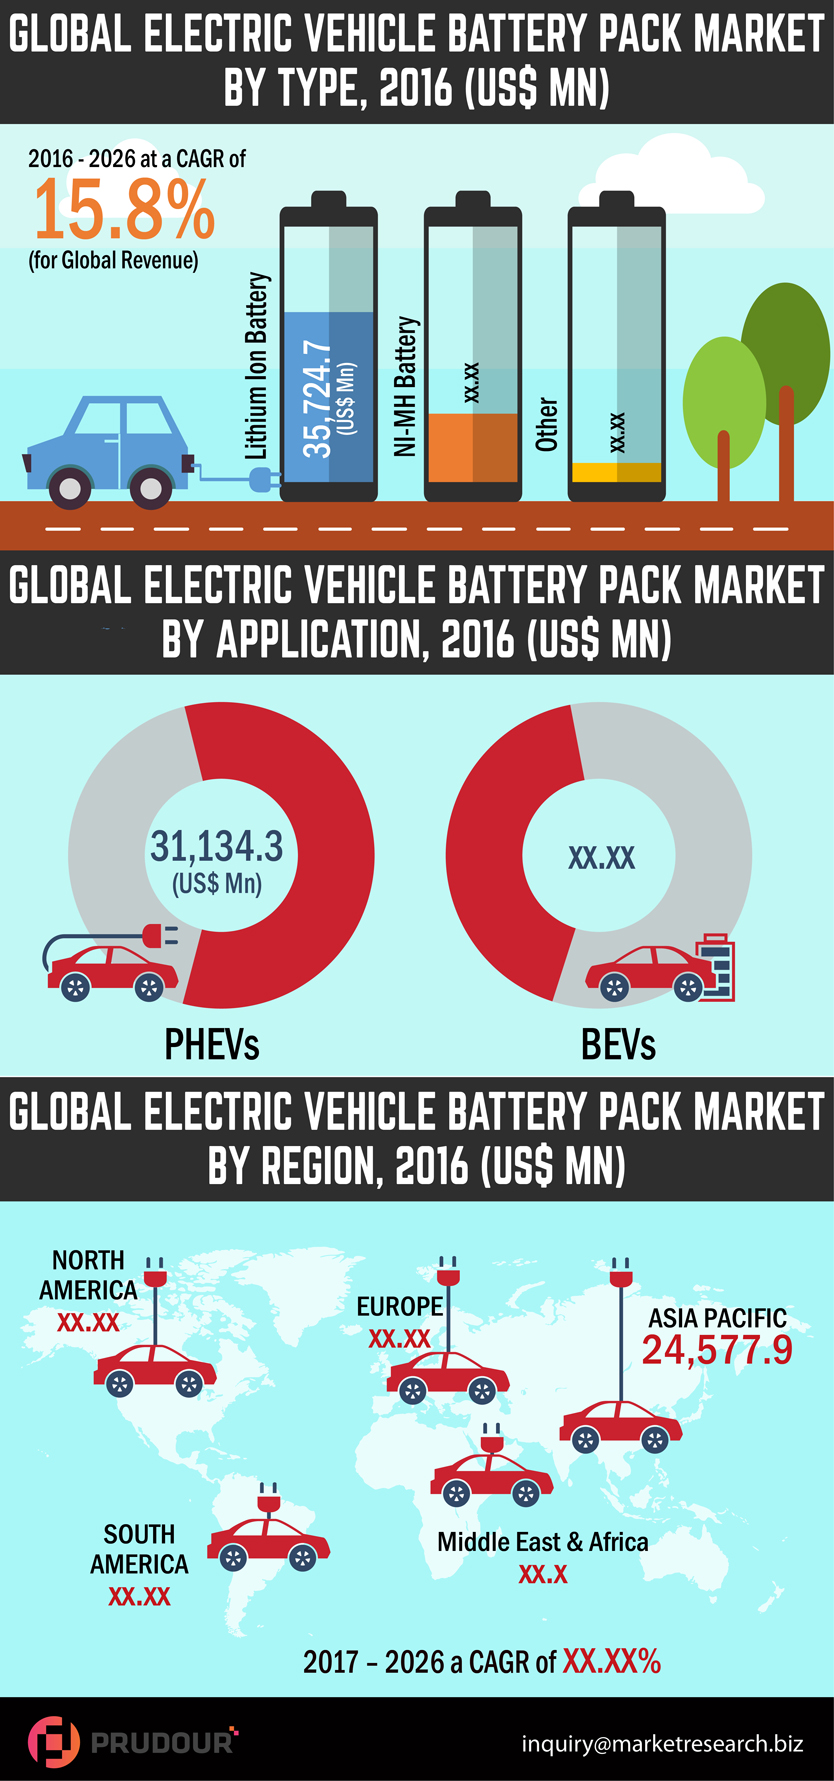 2026 US$ 2,30,433.2 Mn: Global Electric Vehicle Battery Pack Market is expected to reach US$ 2,30,433.2 Mn in 2026